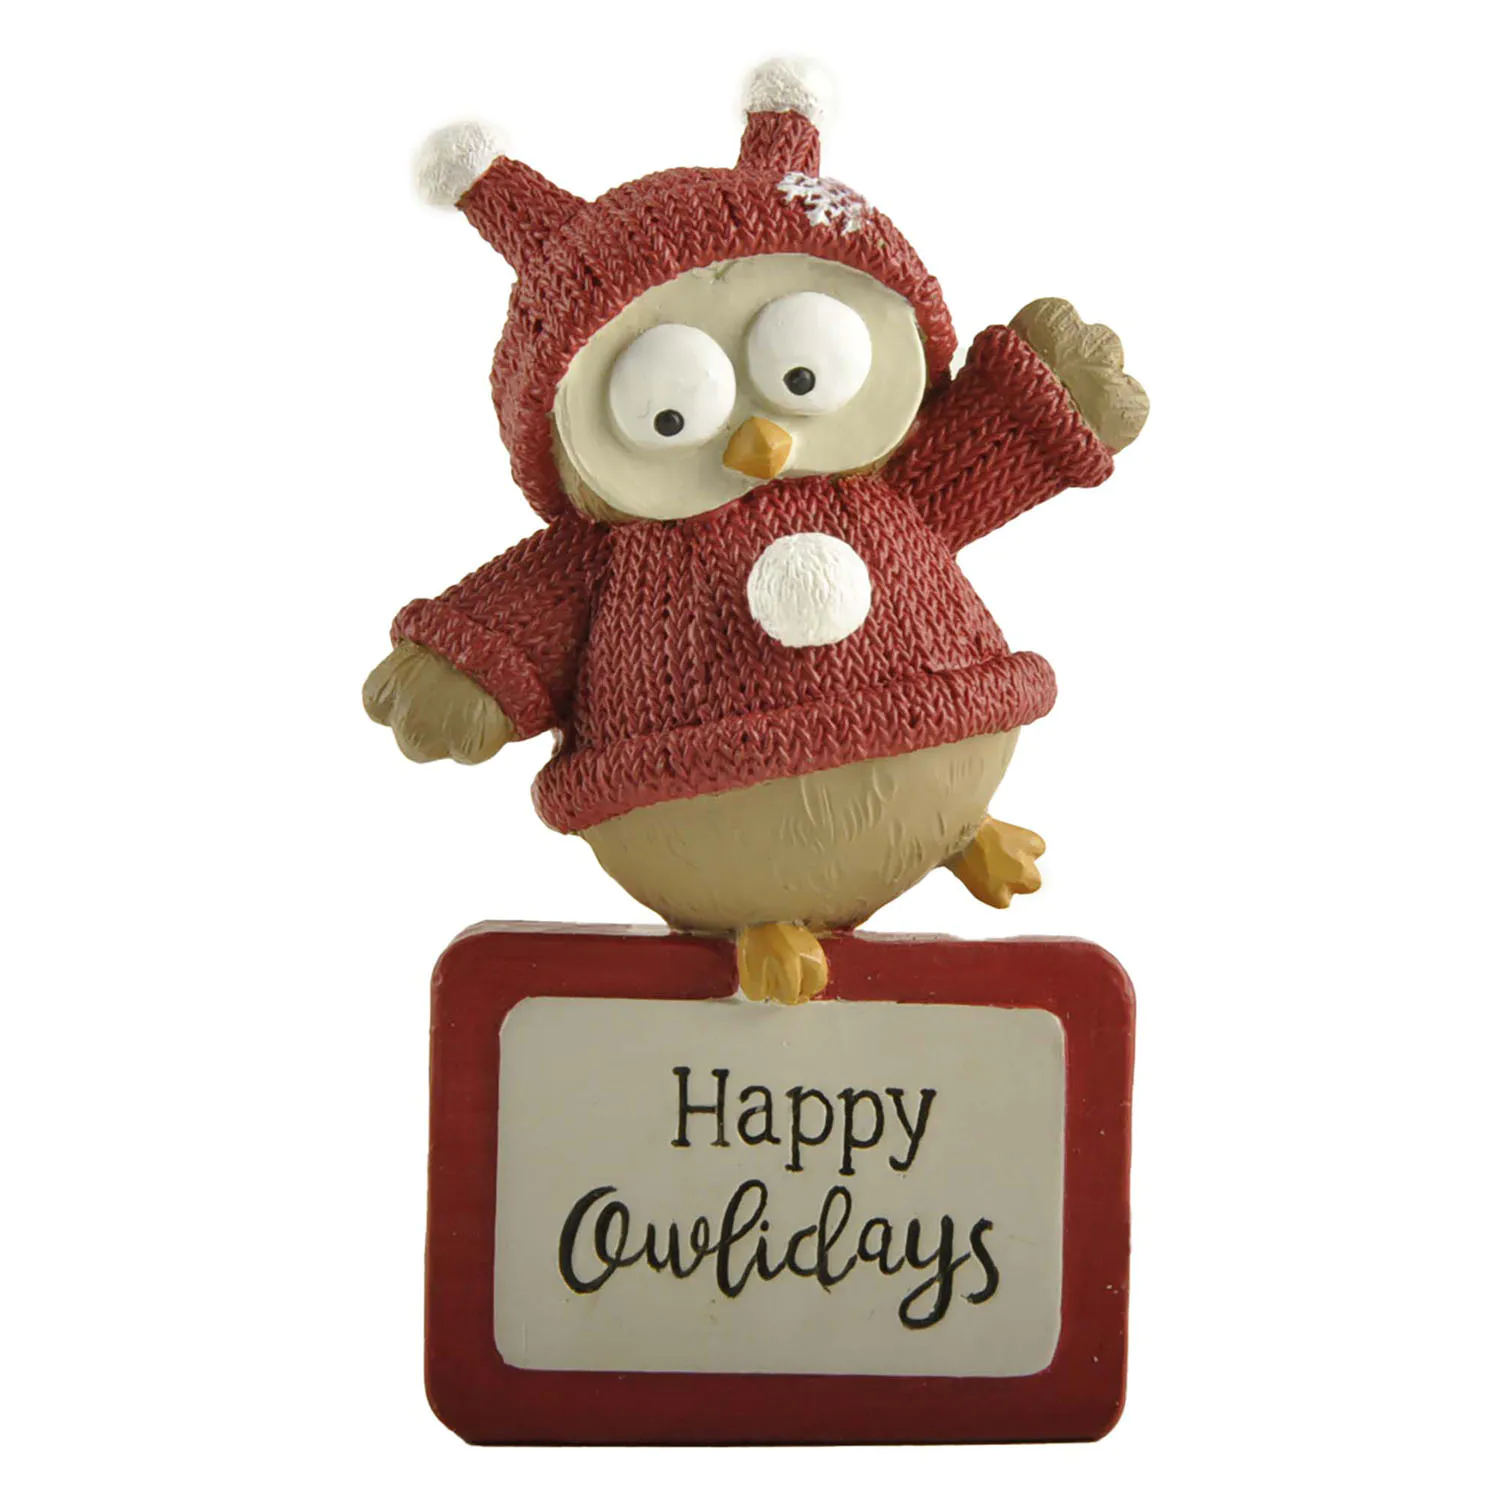 Factory Handmade Festive Resin Owl Figurine in Red Christmas Attire with 'Happy Owlidays' Inscribed Base for Home Decor 238-13895